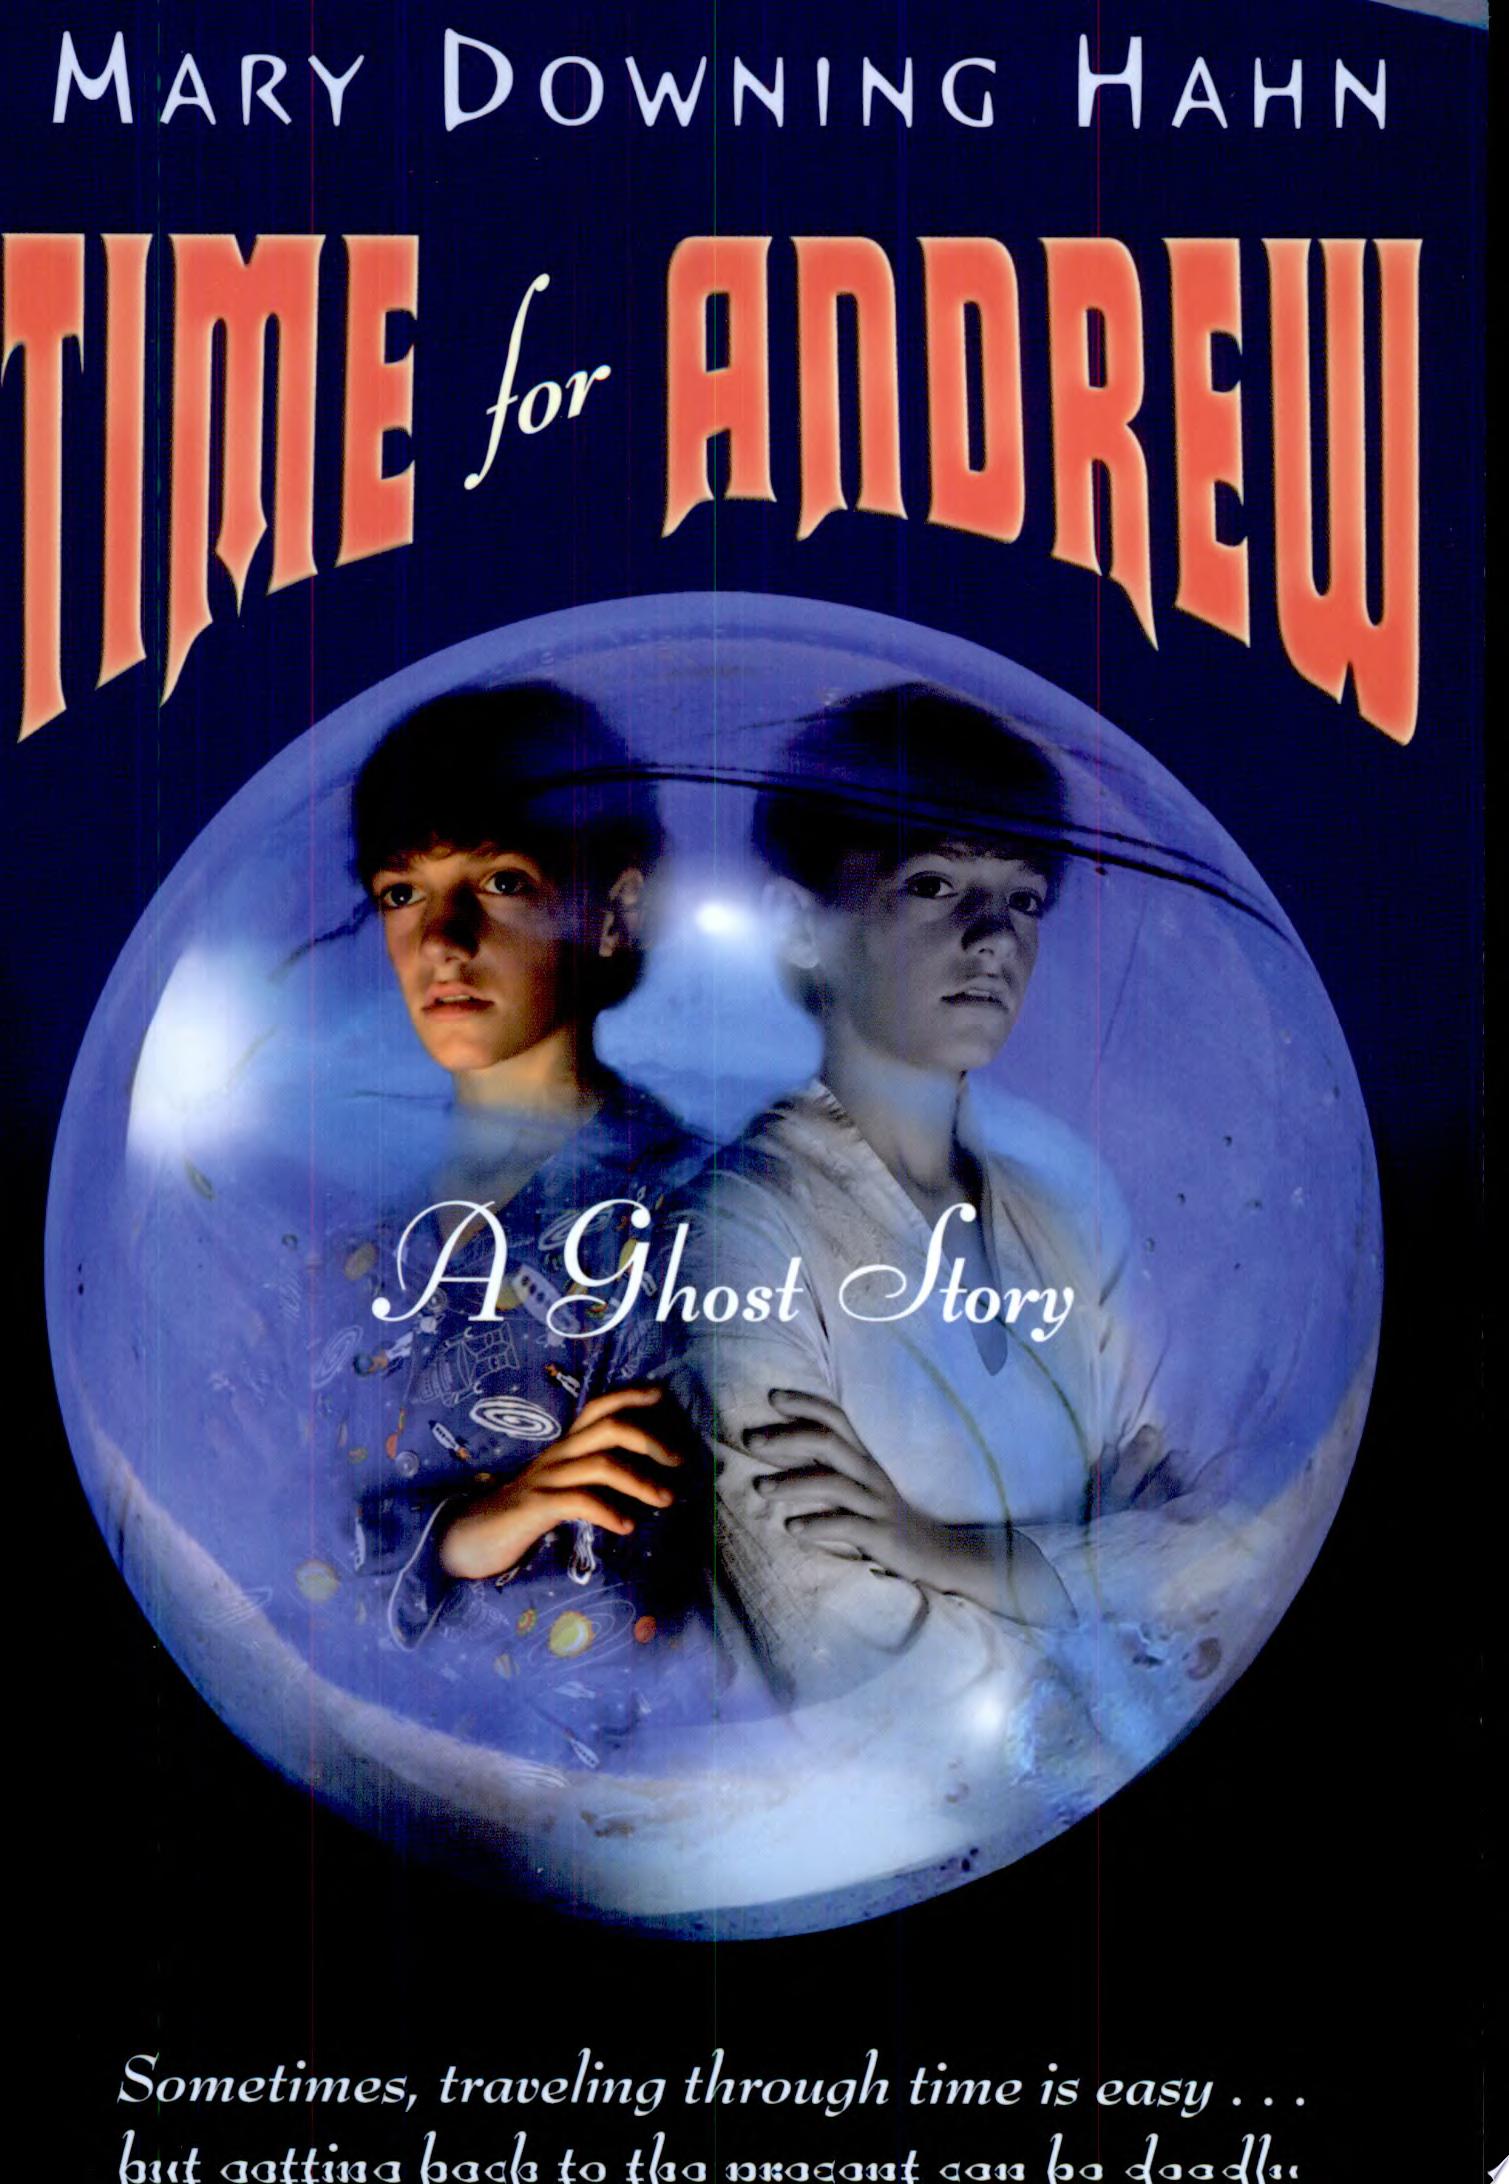 Image for "Time for Andrew"